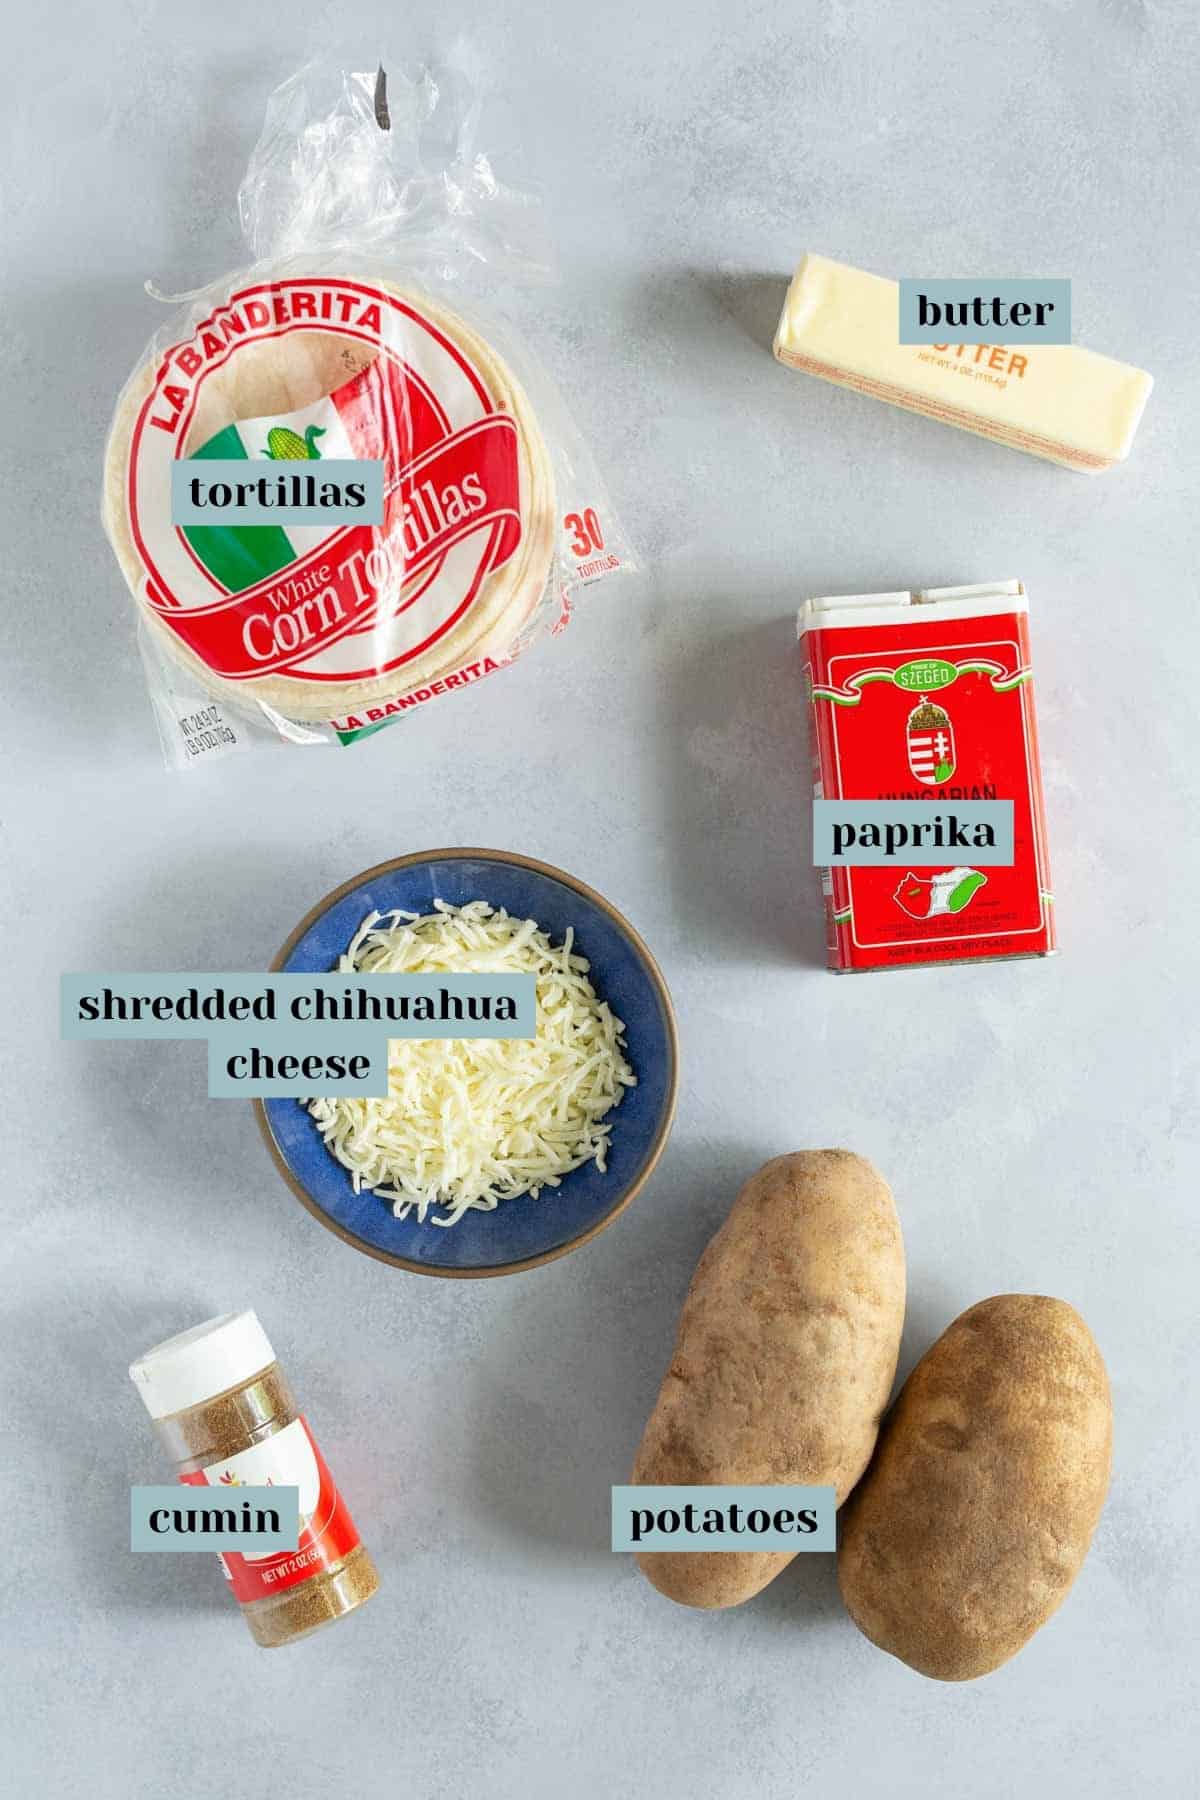 Ingredients laid out on a gray surface: a stack of tortillas in packaging, a stick of butter, a can of paprika, two russet potatoes, a bowl of shredded Chihuahua cheese, and a jar of cumin.